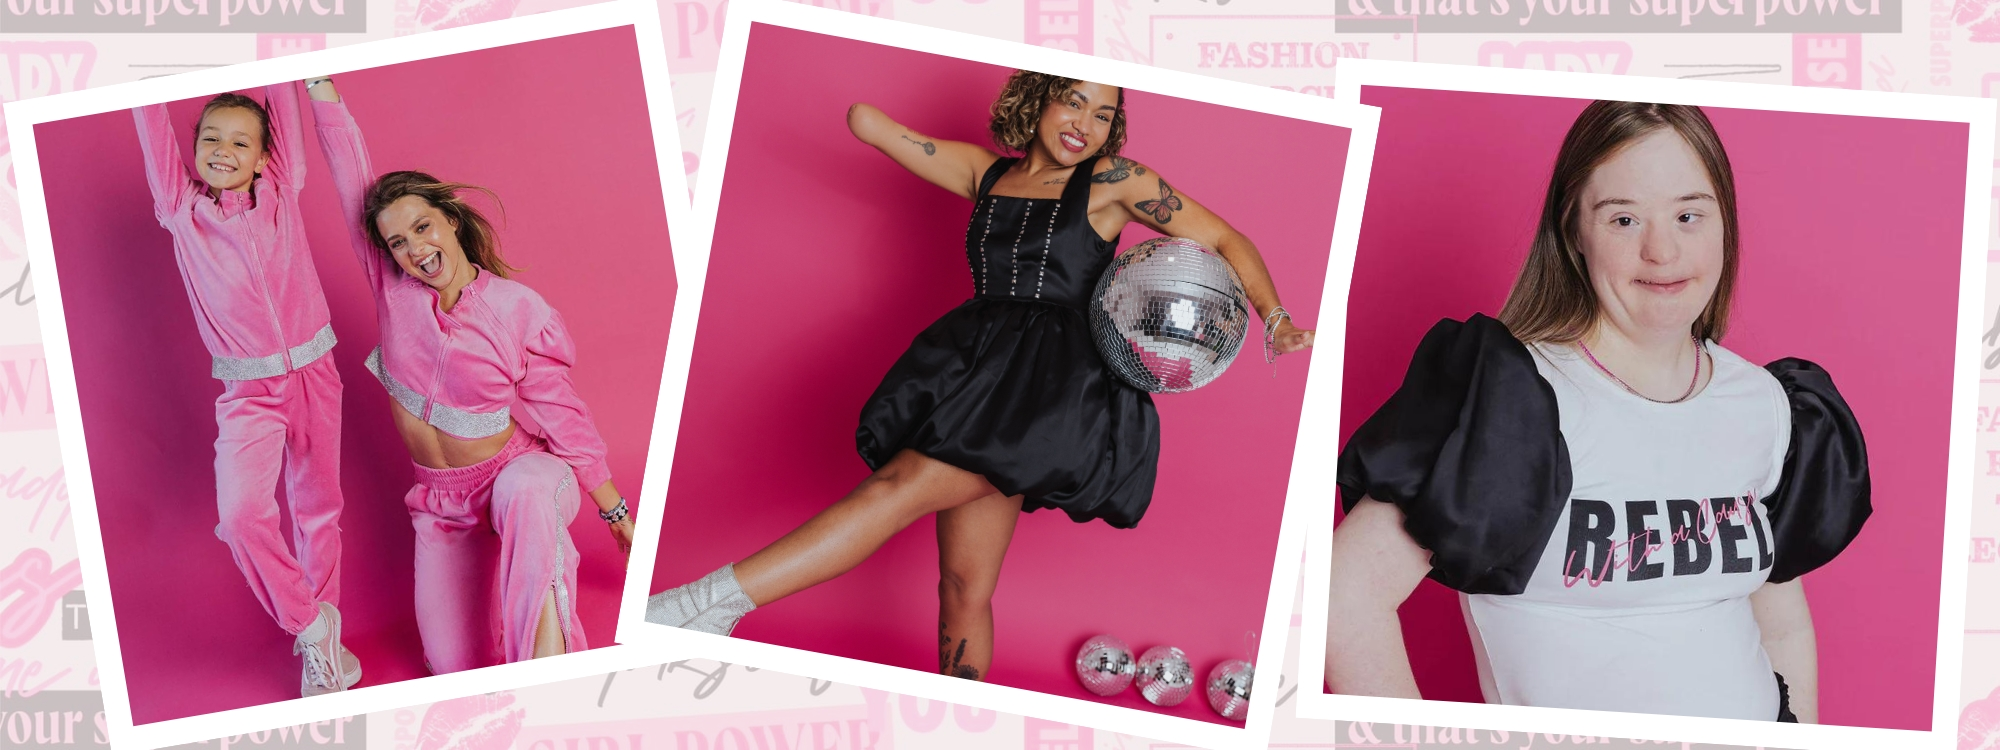 Banner image with 3 floating photos in white frames. The photos feature a young girl and woman in matching pink tracksuits, a young woman in a black bubble dress, and a young woman with Down Syndrome wearing a black and white top with puff sleeves.